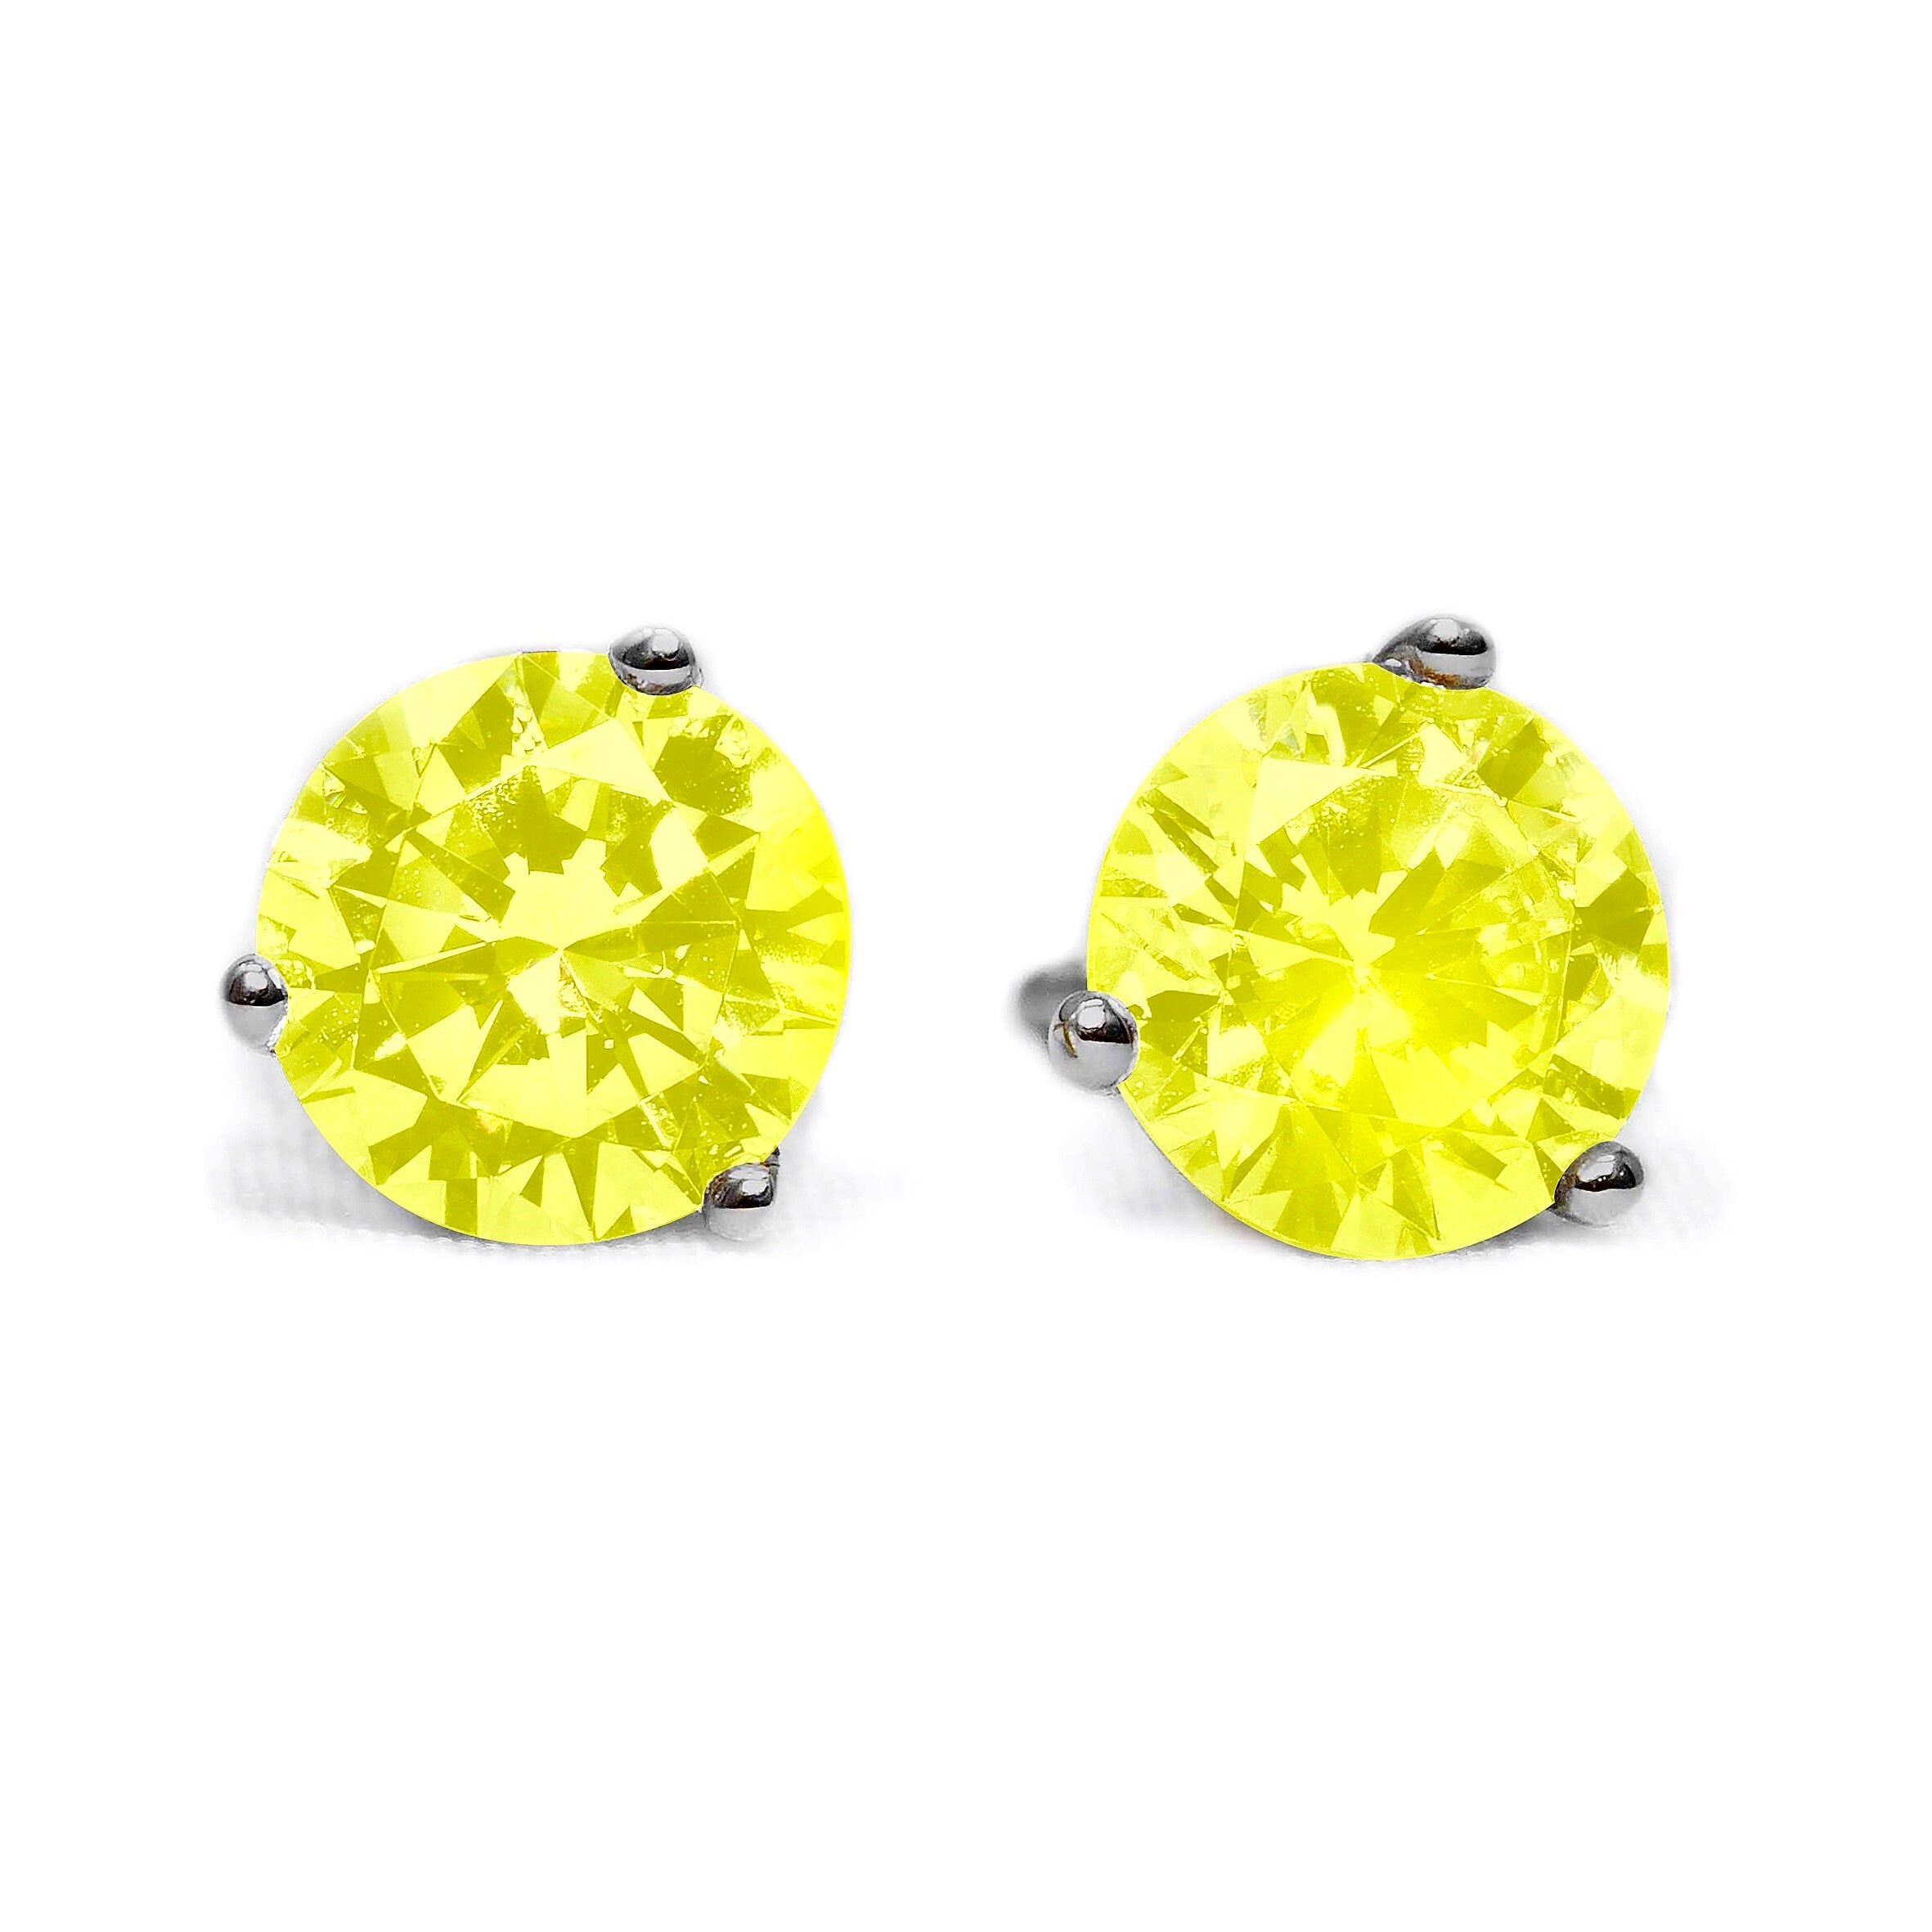 Buy 8 TCW Oval Cut Canary Yellow Moissanite Stud Earrings Online in India   Etsy